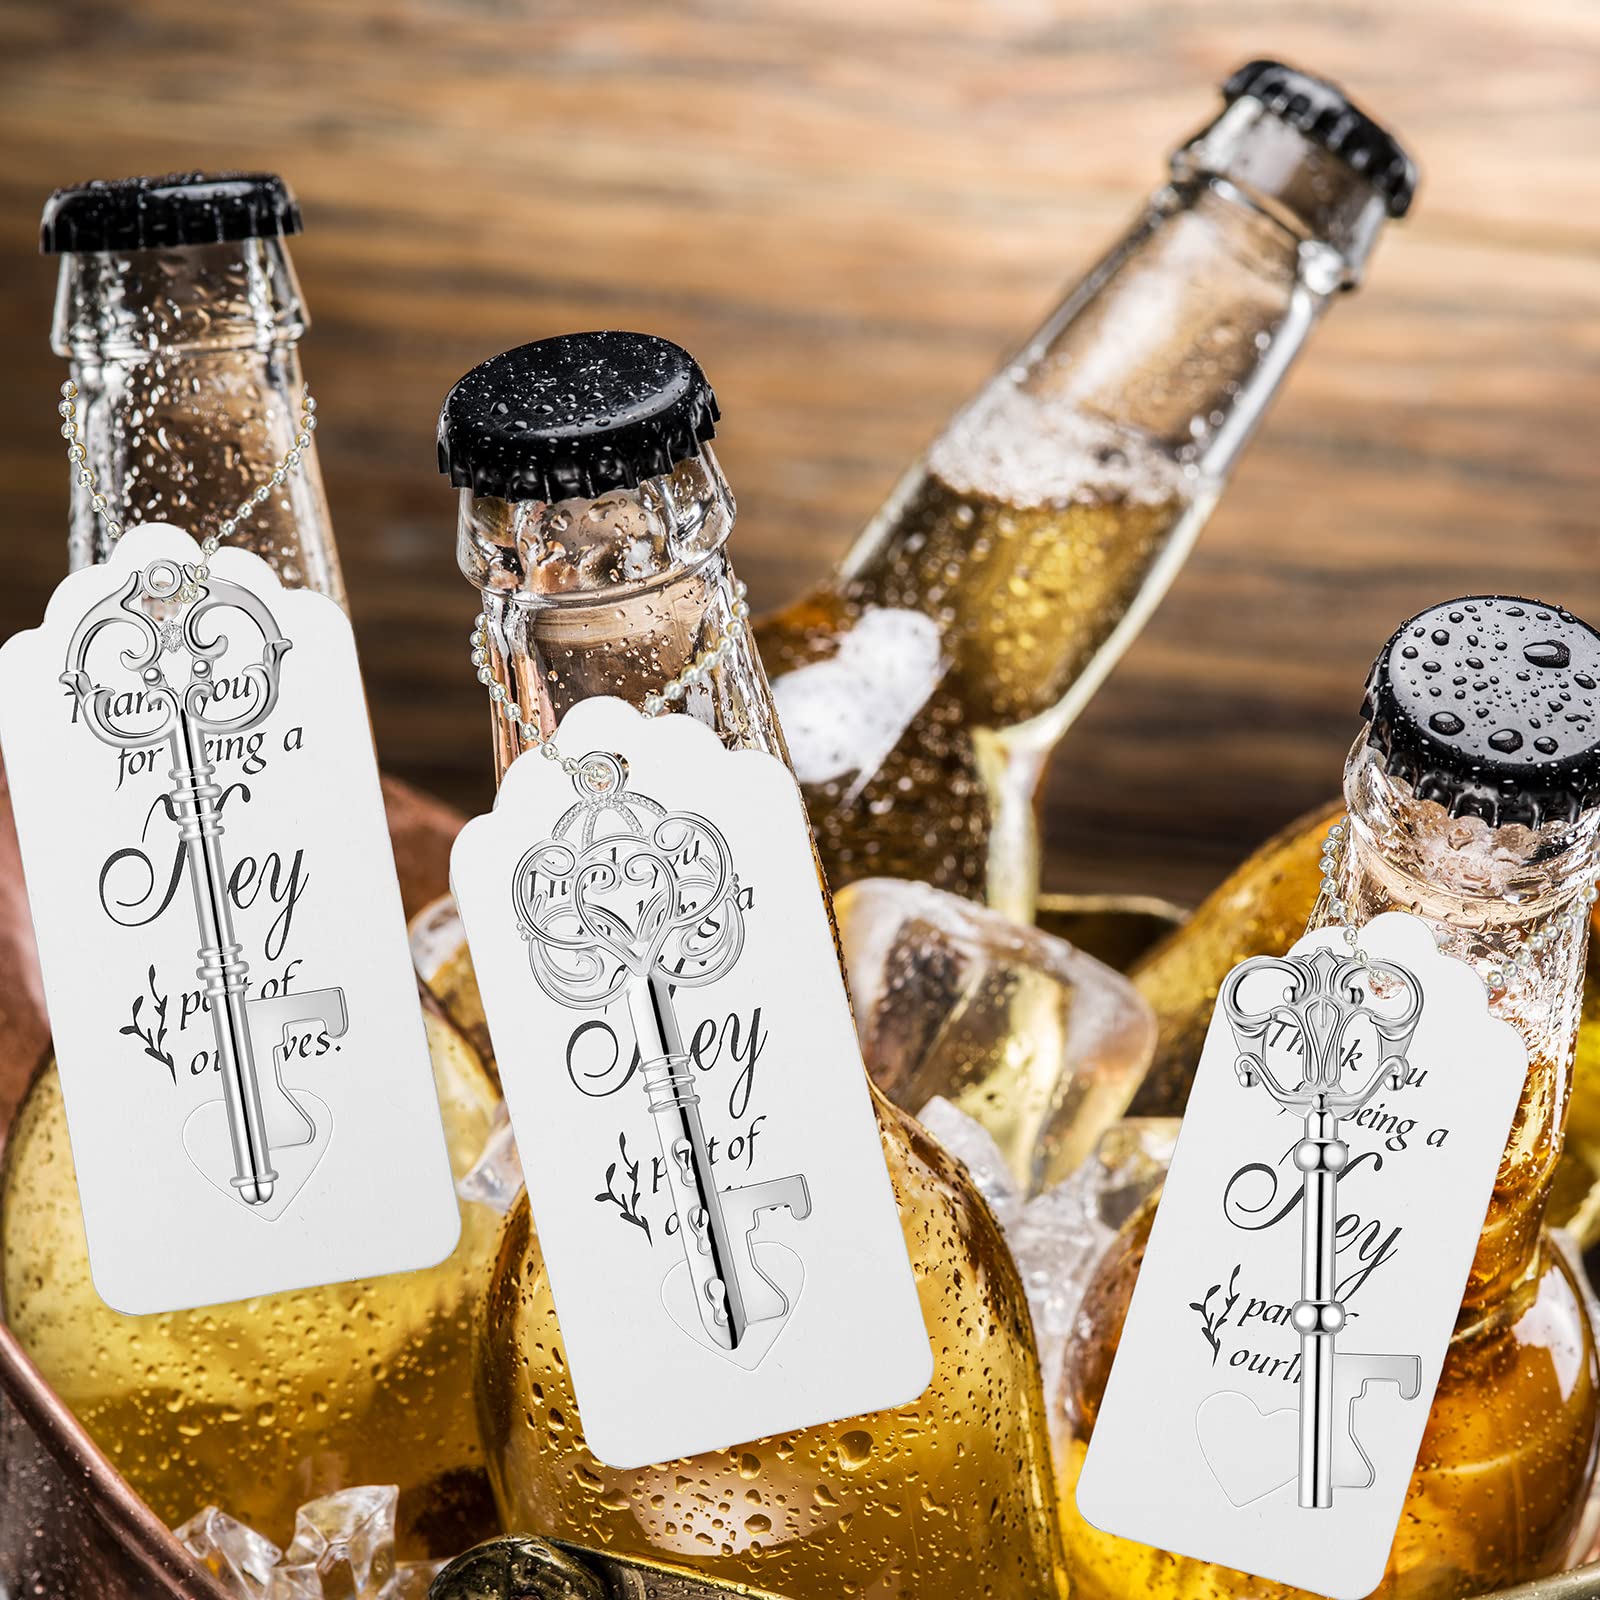 100 Pcs Wedding Favors Key Bottle Opener Skeleton Key Bottle Opener Bridal Shower Party Favors with Card Tag and Chains Bulk for Rustic Wedding Gifts Christmas Decor, Silver